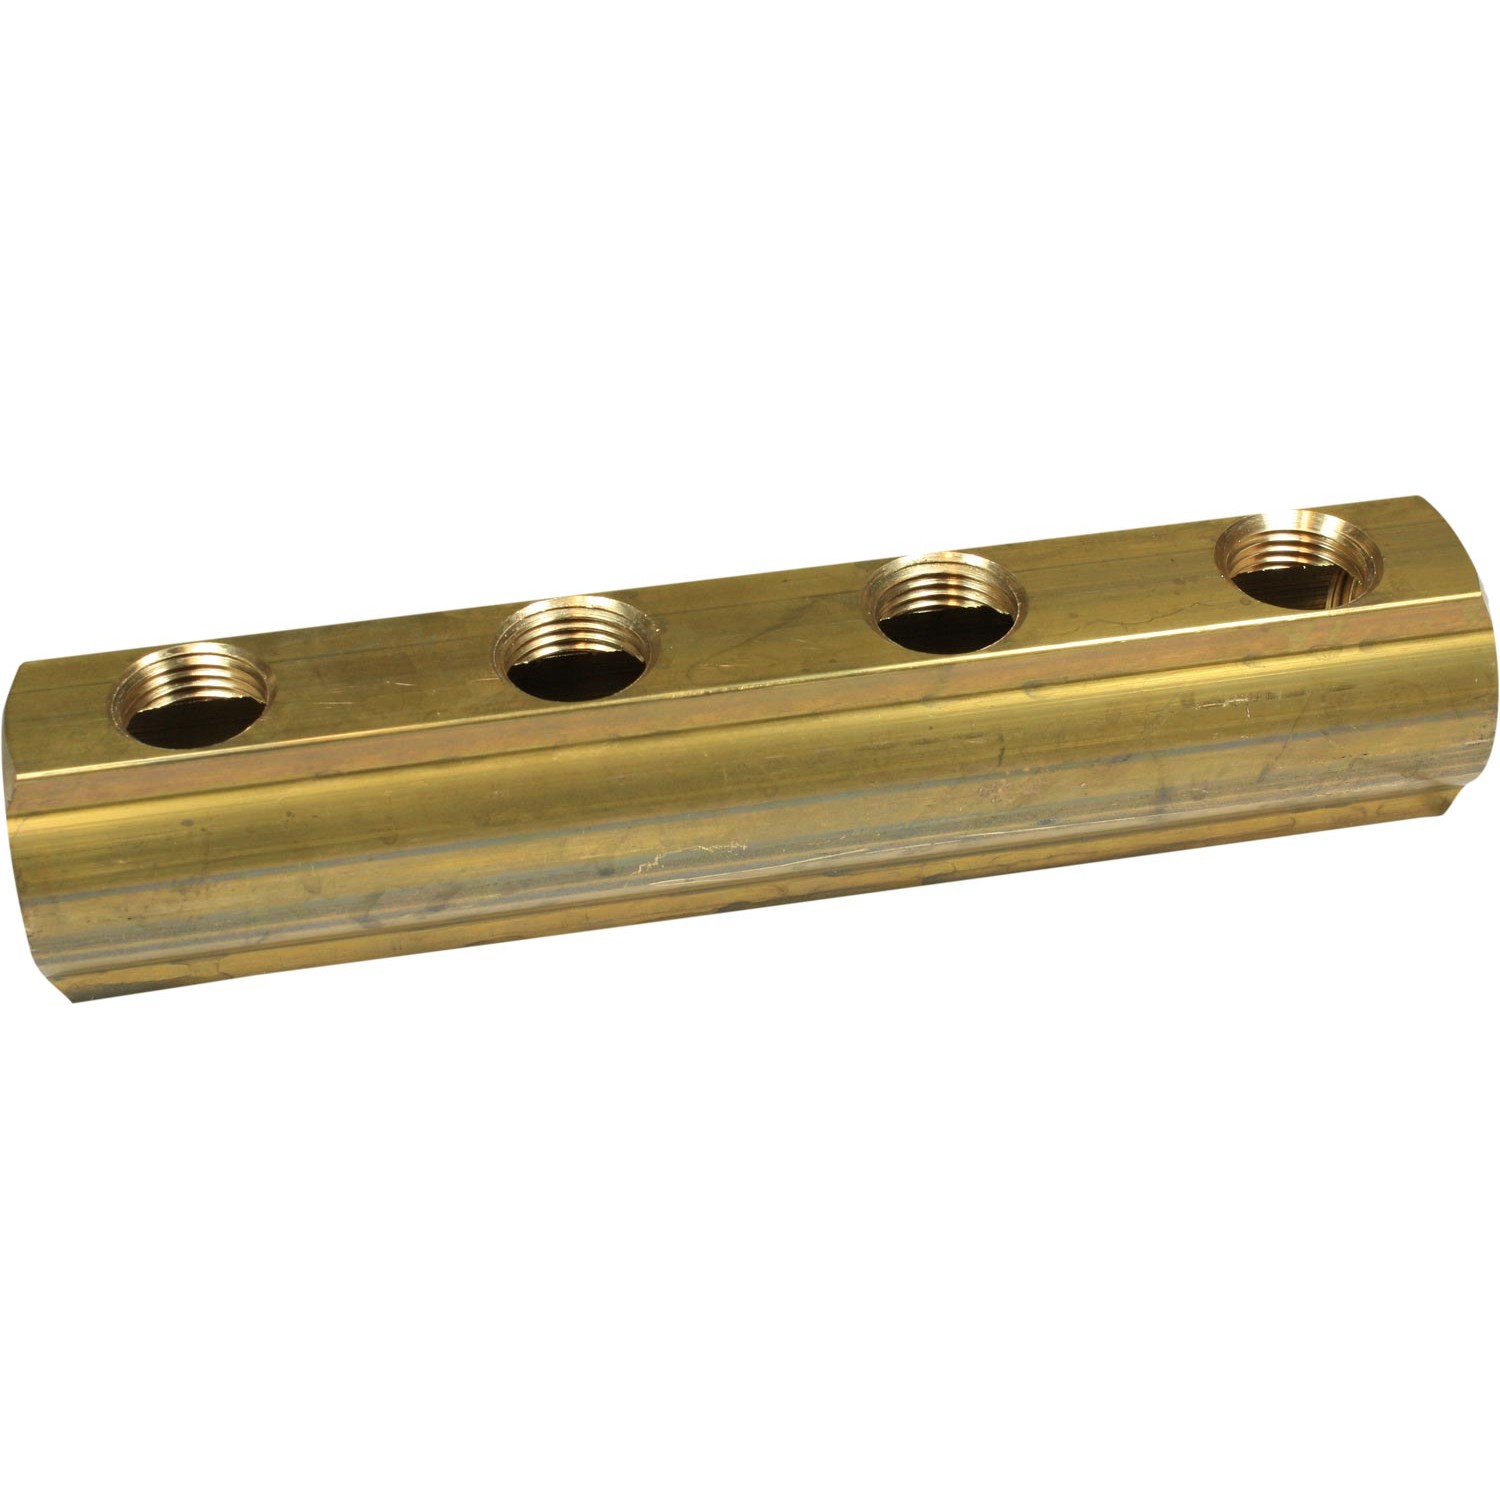 4x Outlets MB02/04 Brass Single Sided Manifold Block BSPP Female Inlet 1/8" 